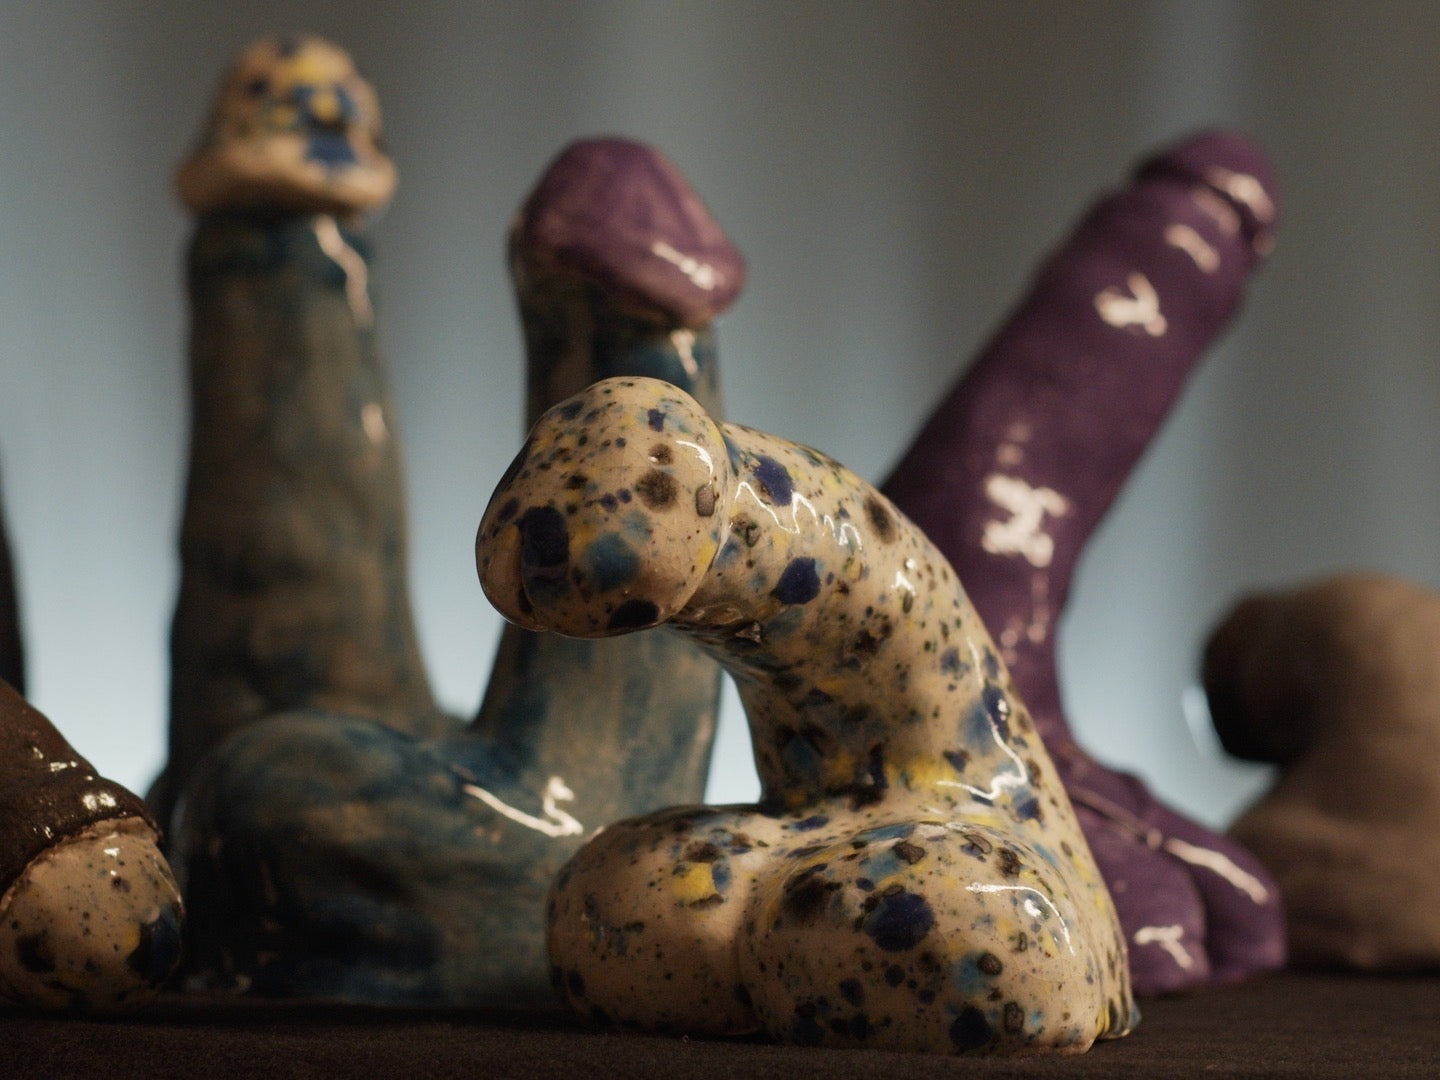 Ceramic Dick Sculpture Workshop with Daniela in Berlin, Germany by subcultours